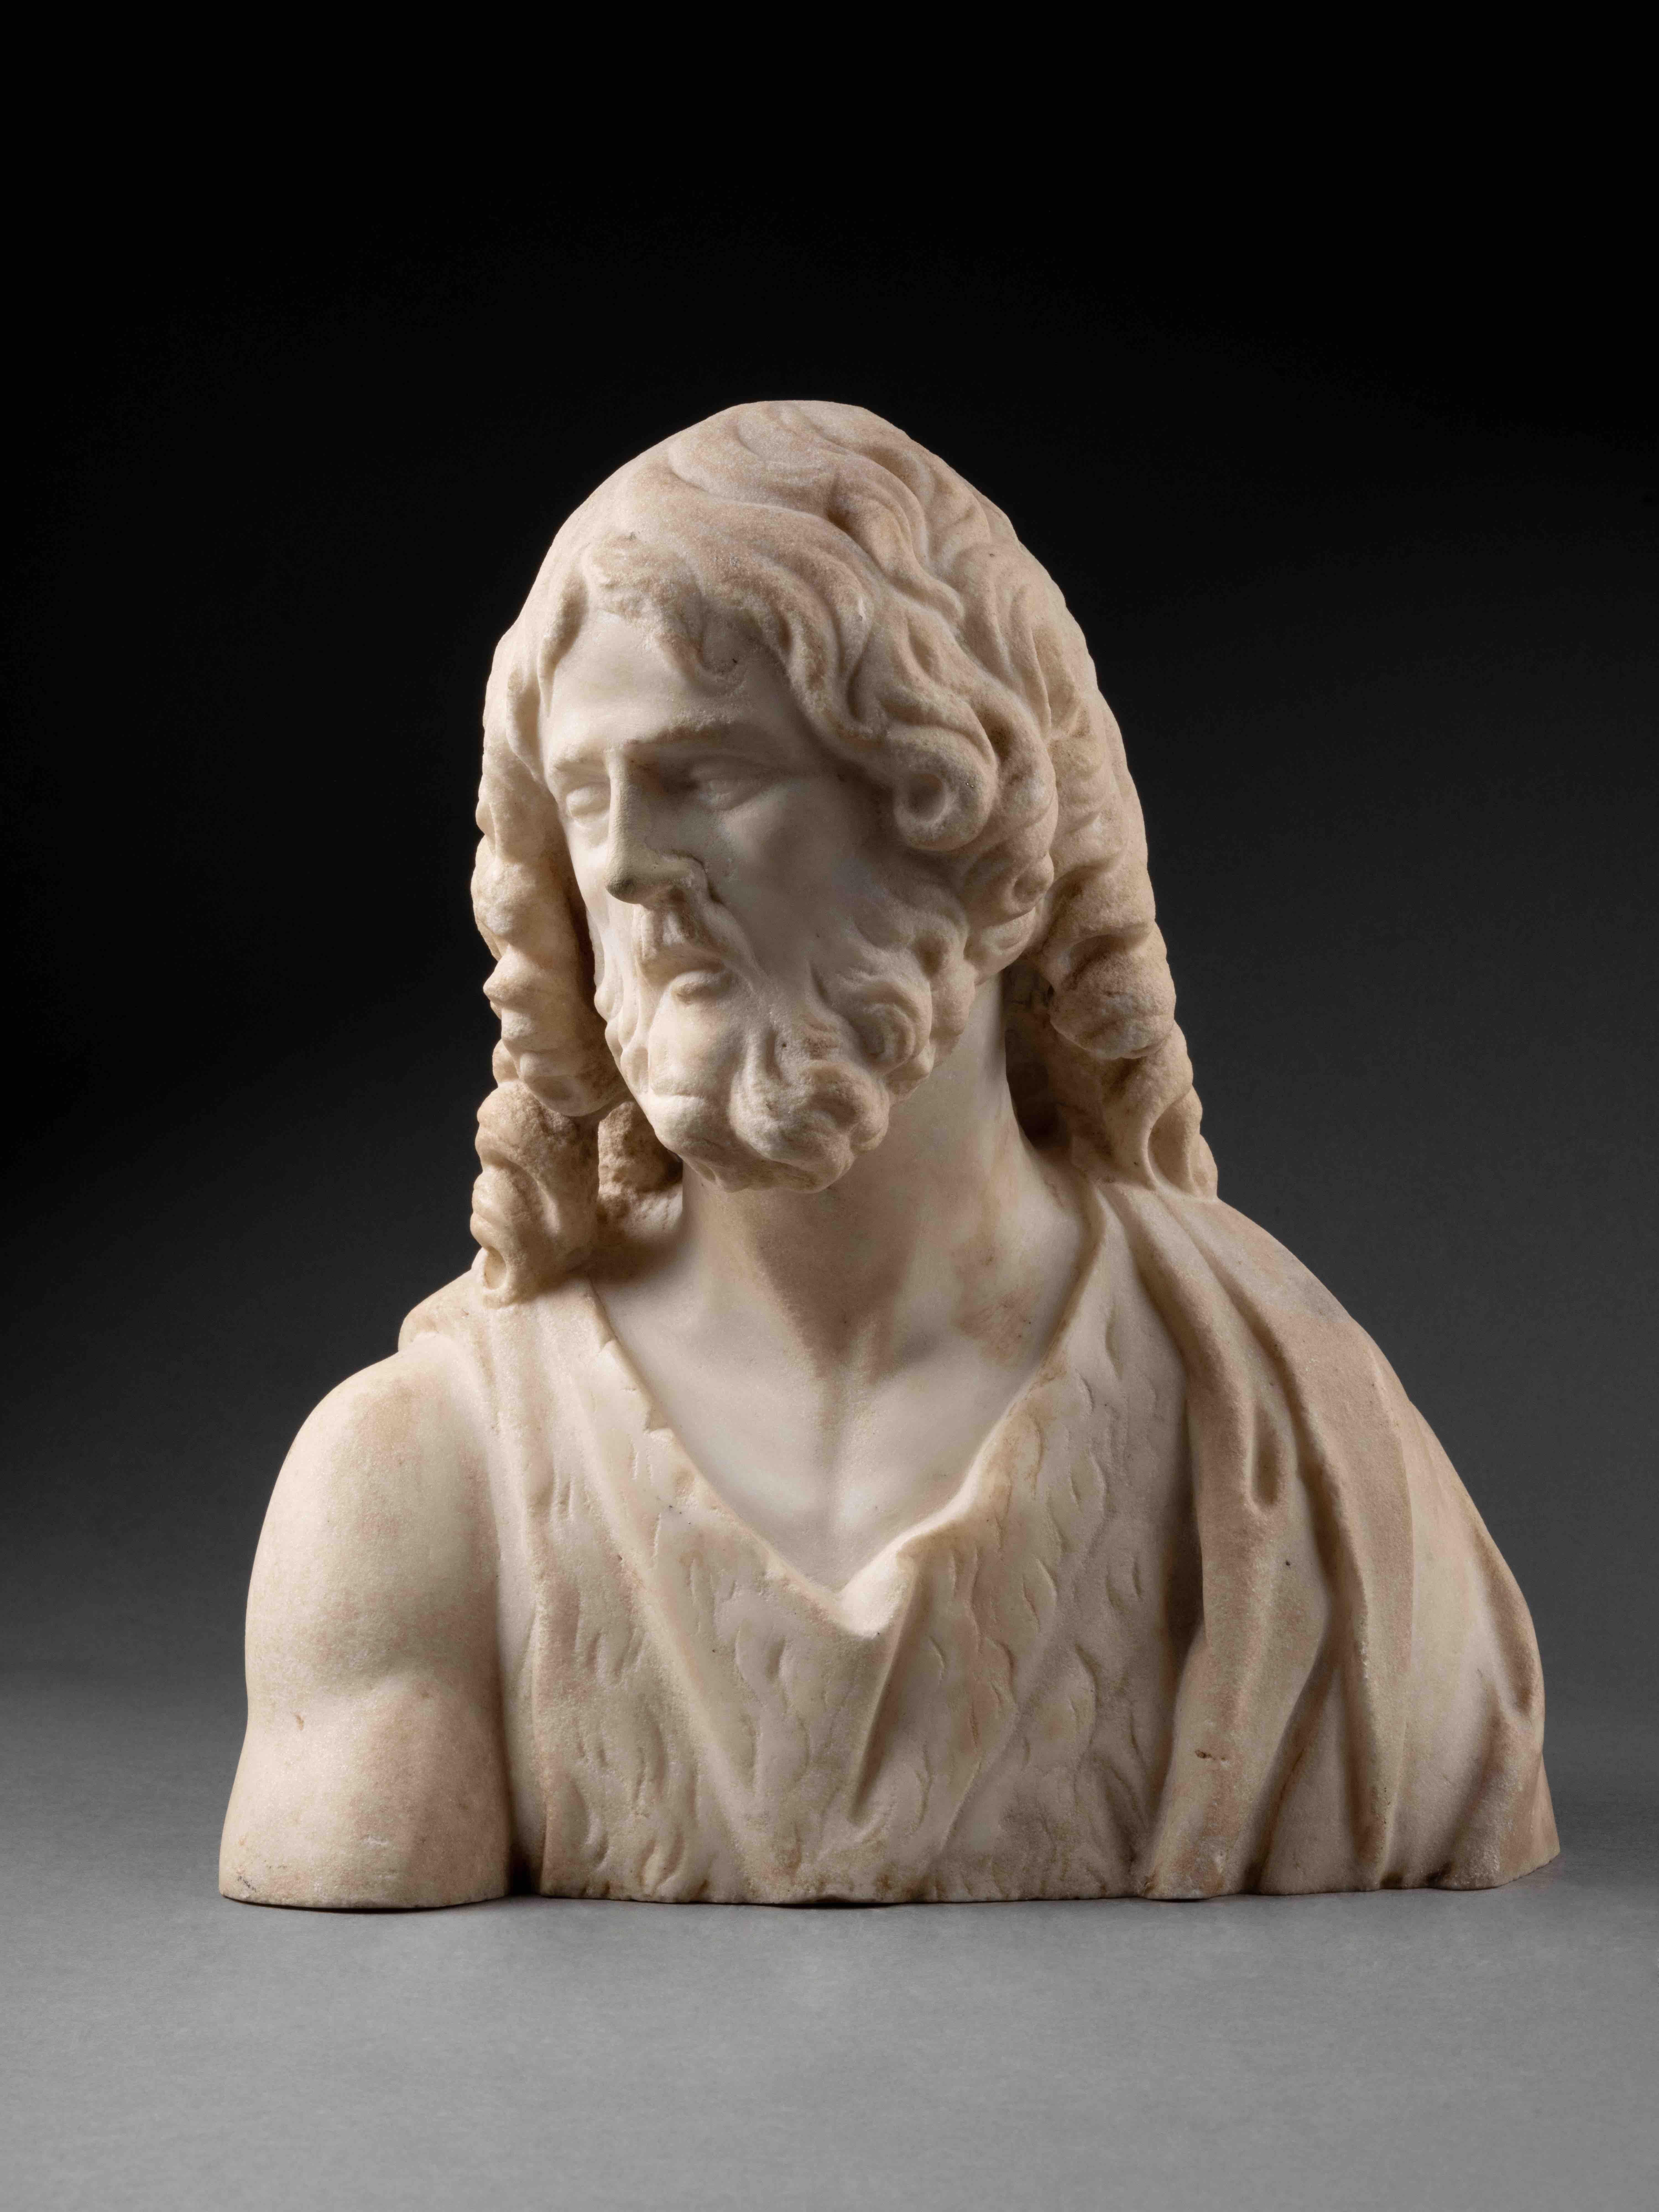 Follower of Andrea Sansovino (1460-1529)
Saint Jean the Baptist 
White marble
Tuscany, 16th century
24 x 23 x 10 cm
(Nose restored)

Saint John the Baptist was the last of the Old Testament prophets and the first saint of the New Testament. A